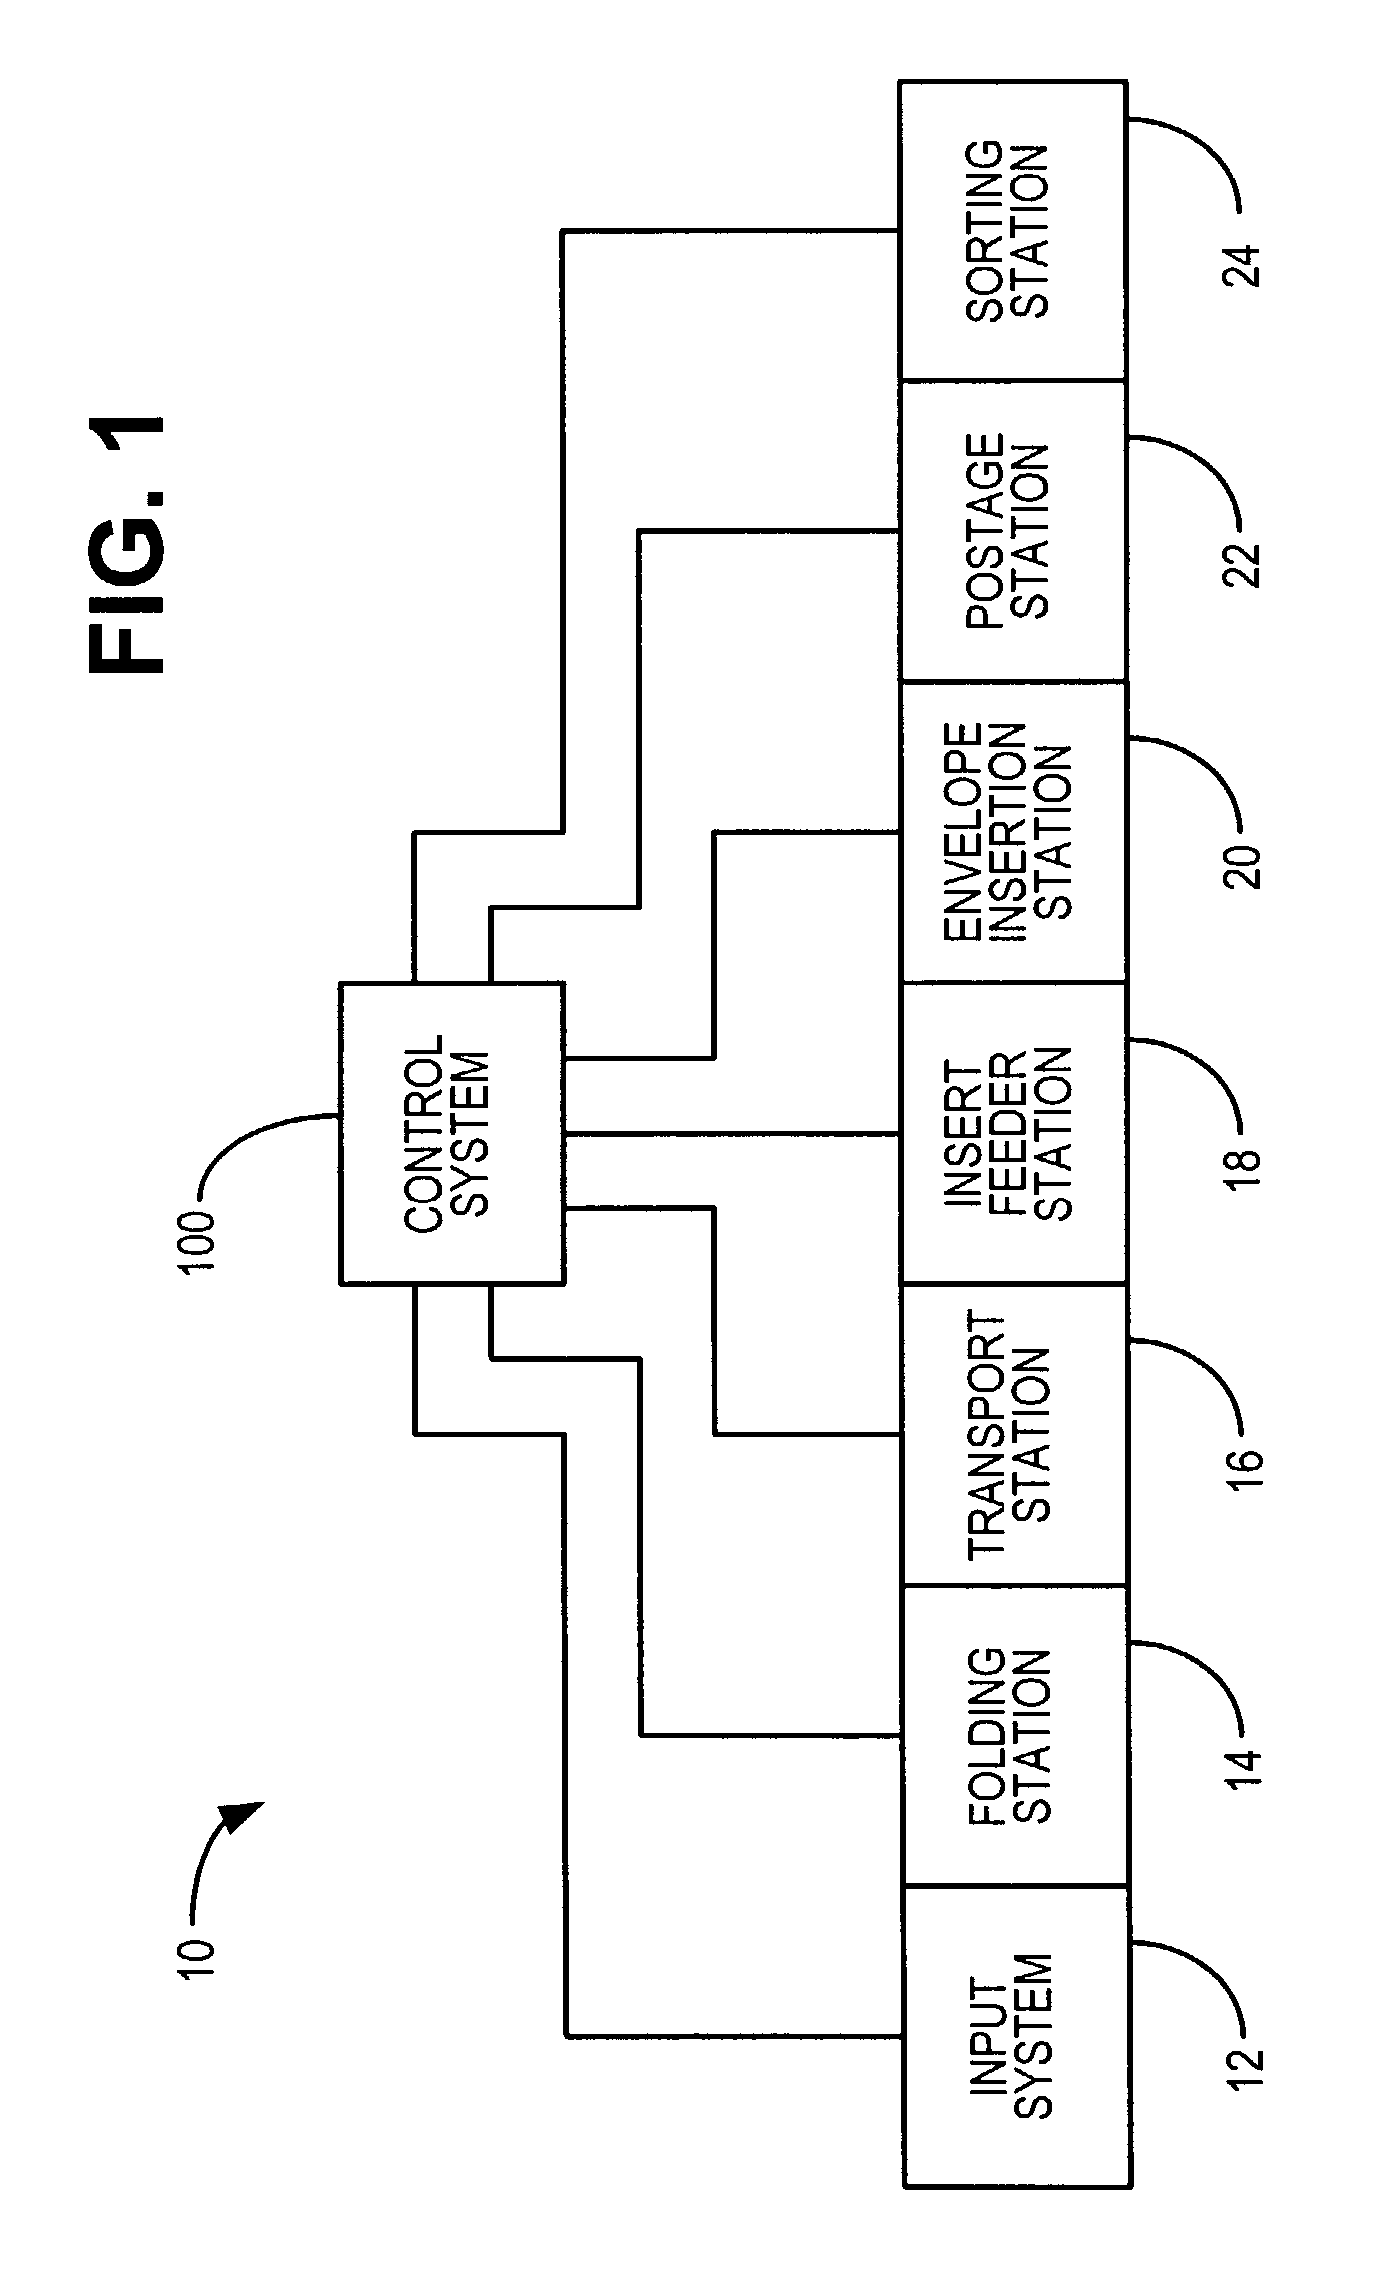 Diagnostic methodology for an inserting machine